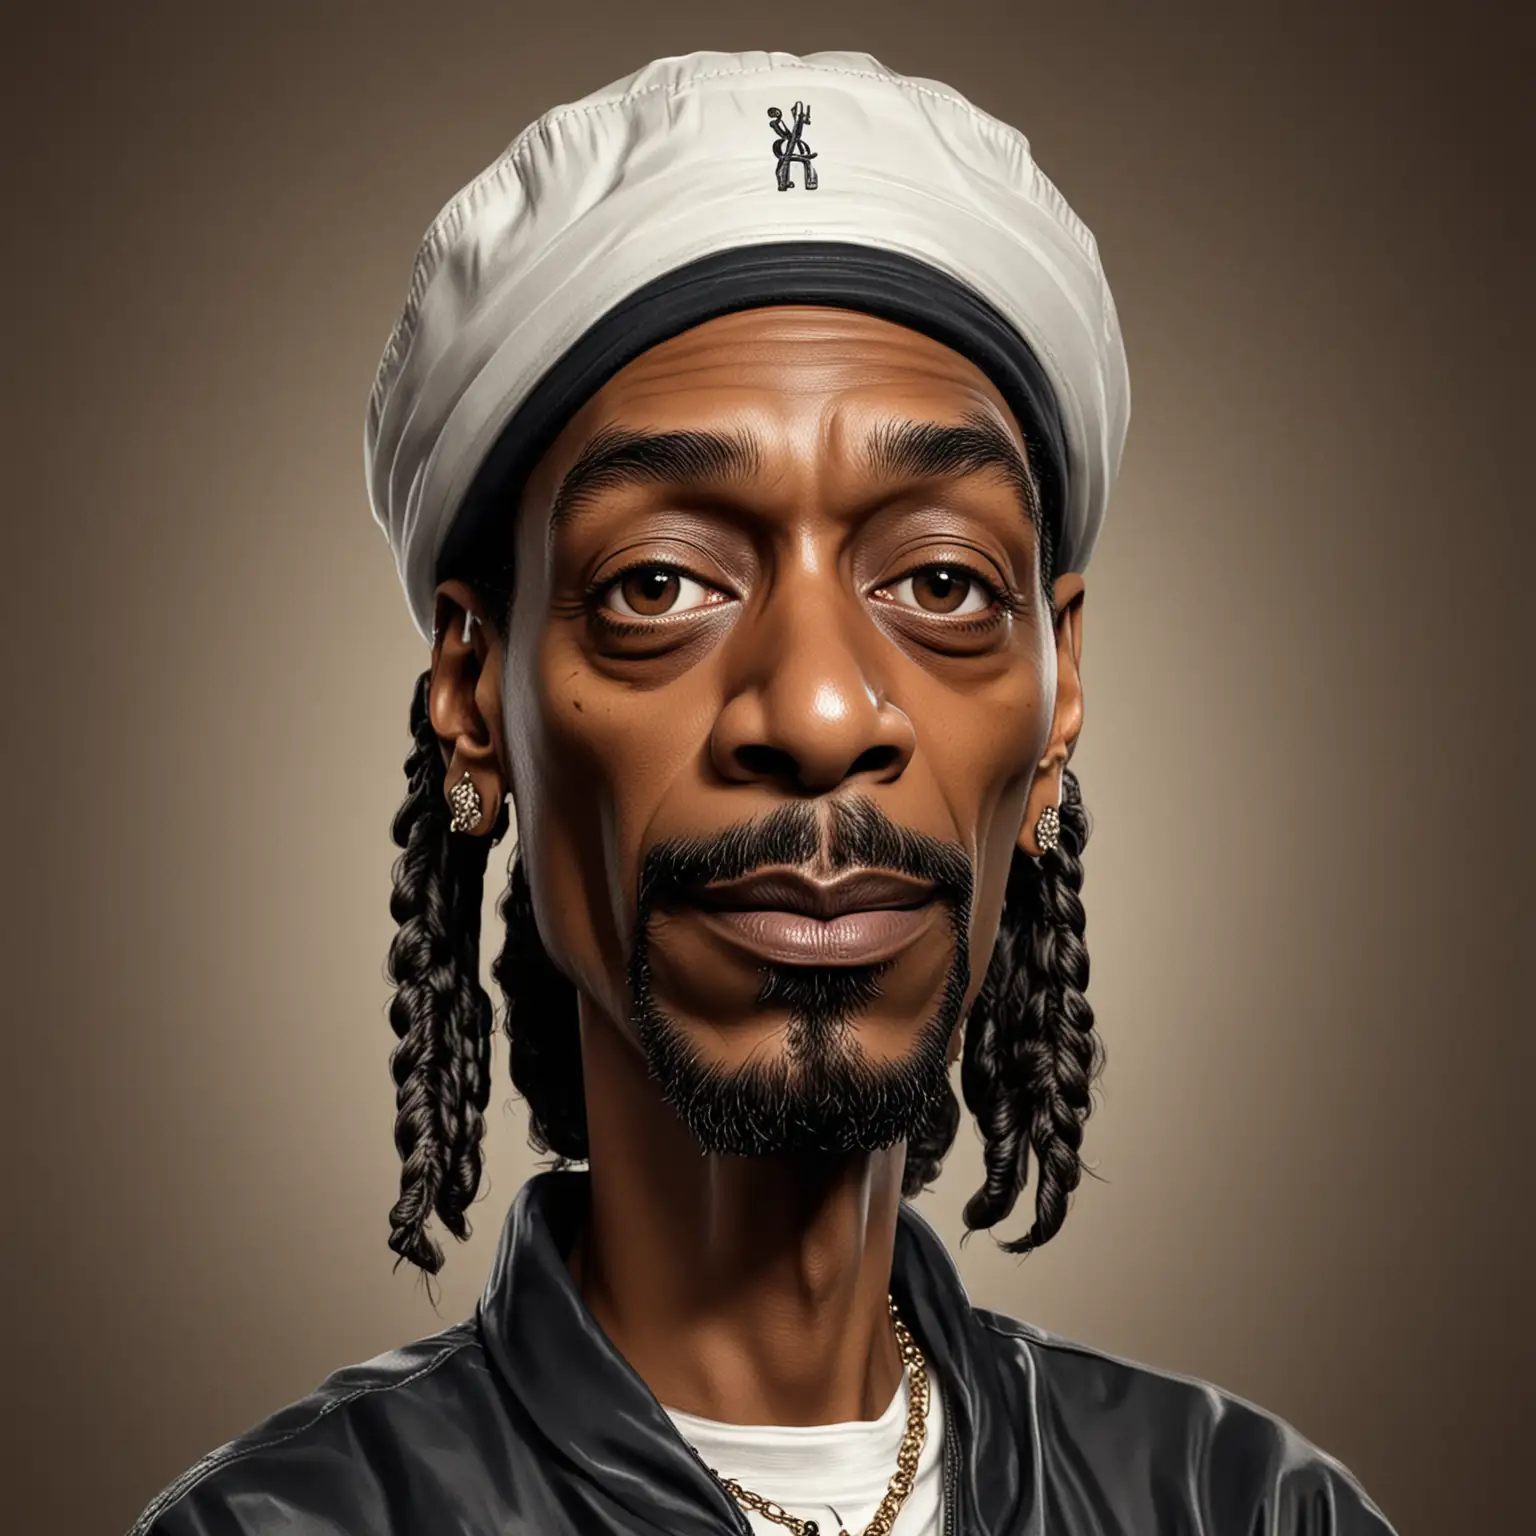 Caricature of Snoop Dogg in a Vibrant Urban Setting